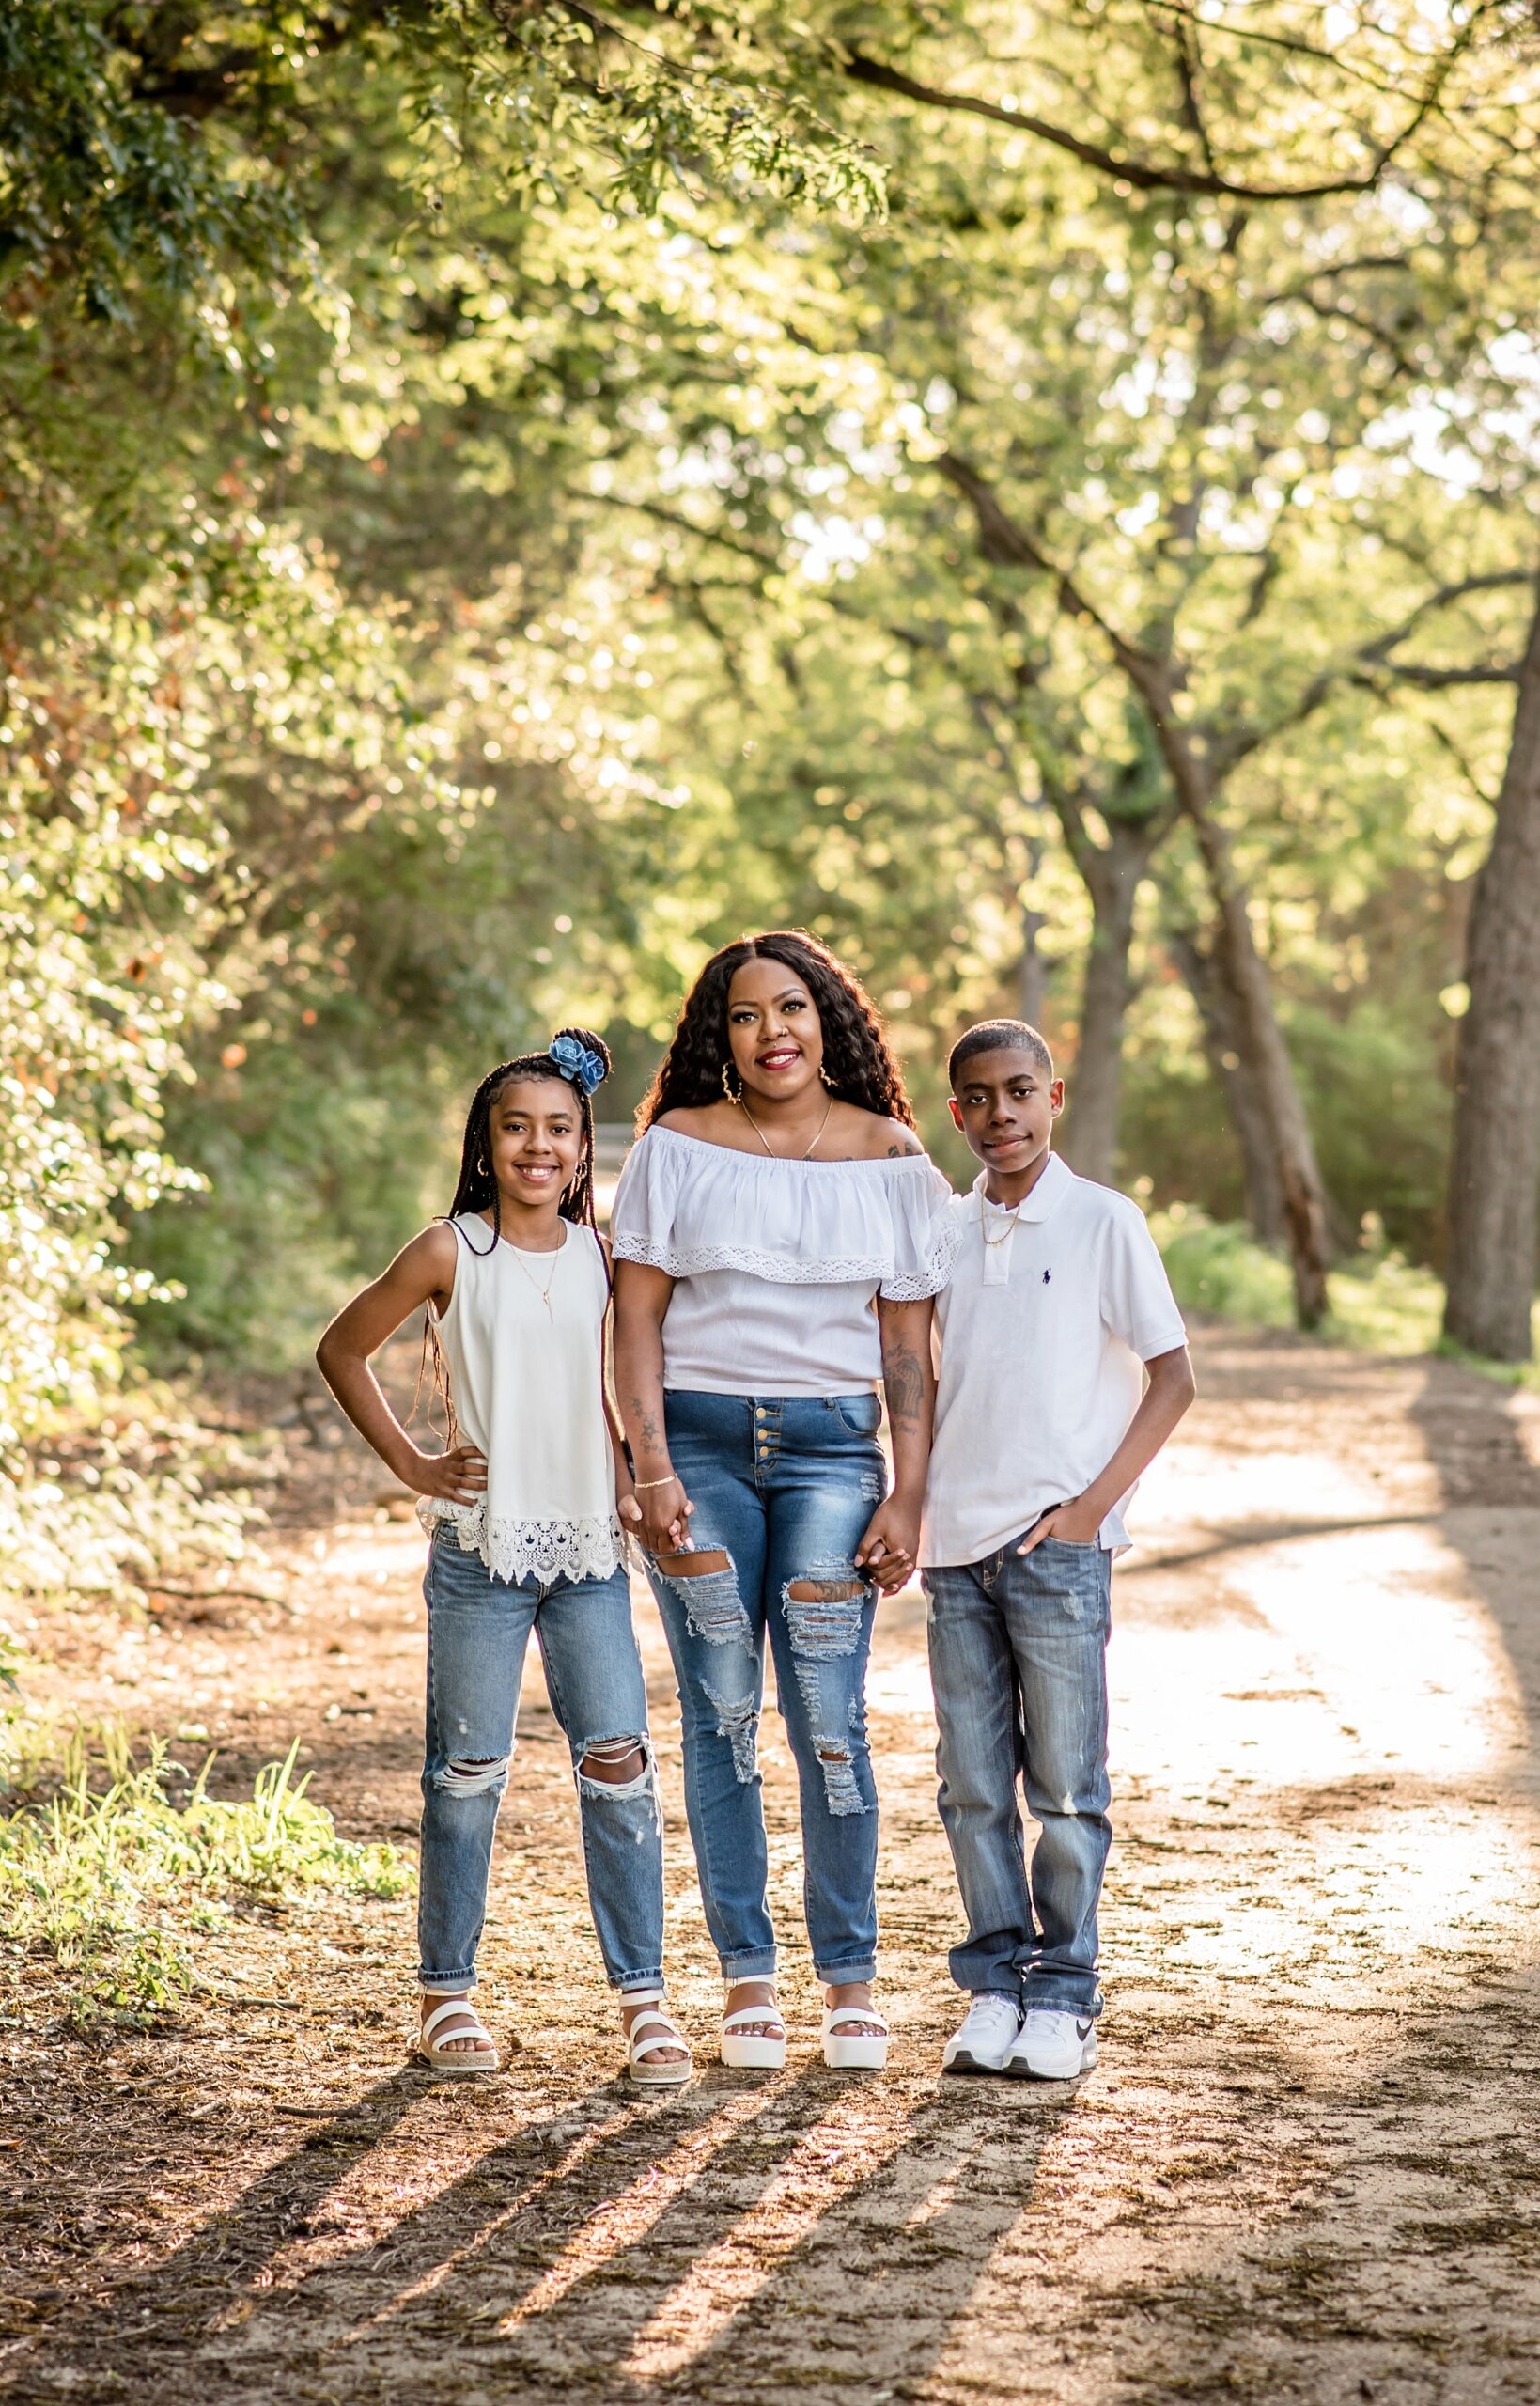 A mother in jeans and white top stands in a park path holding hands with her matching son and daughter waco summer activities